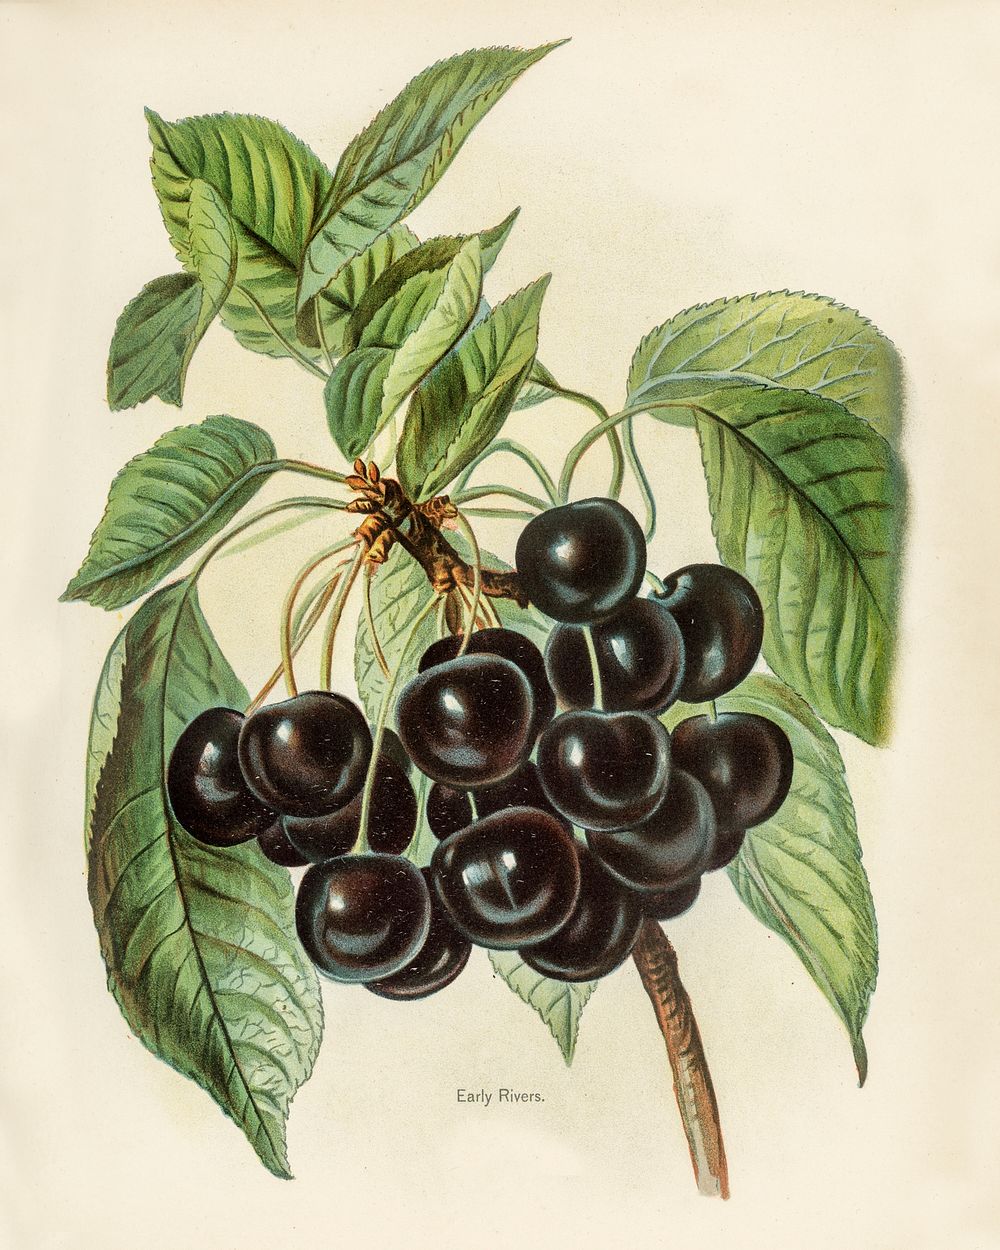 Vintage illustration of early rivers cherries digitally enhanced from our own vintage edition of The Fruit Grower's Guide…